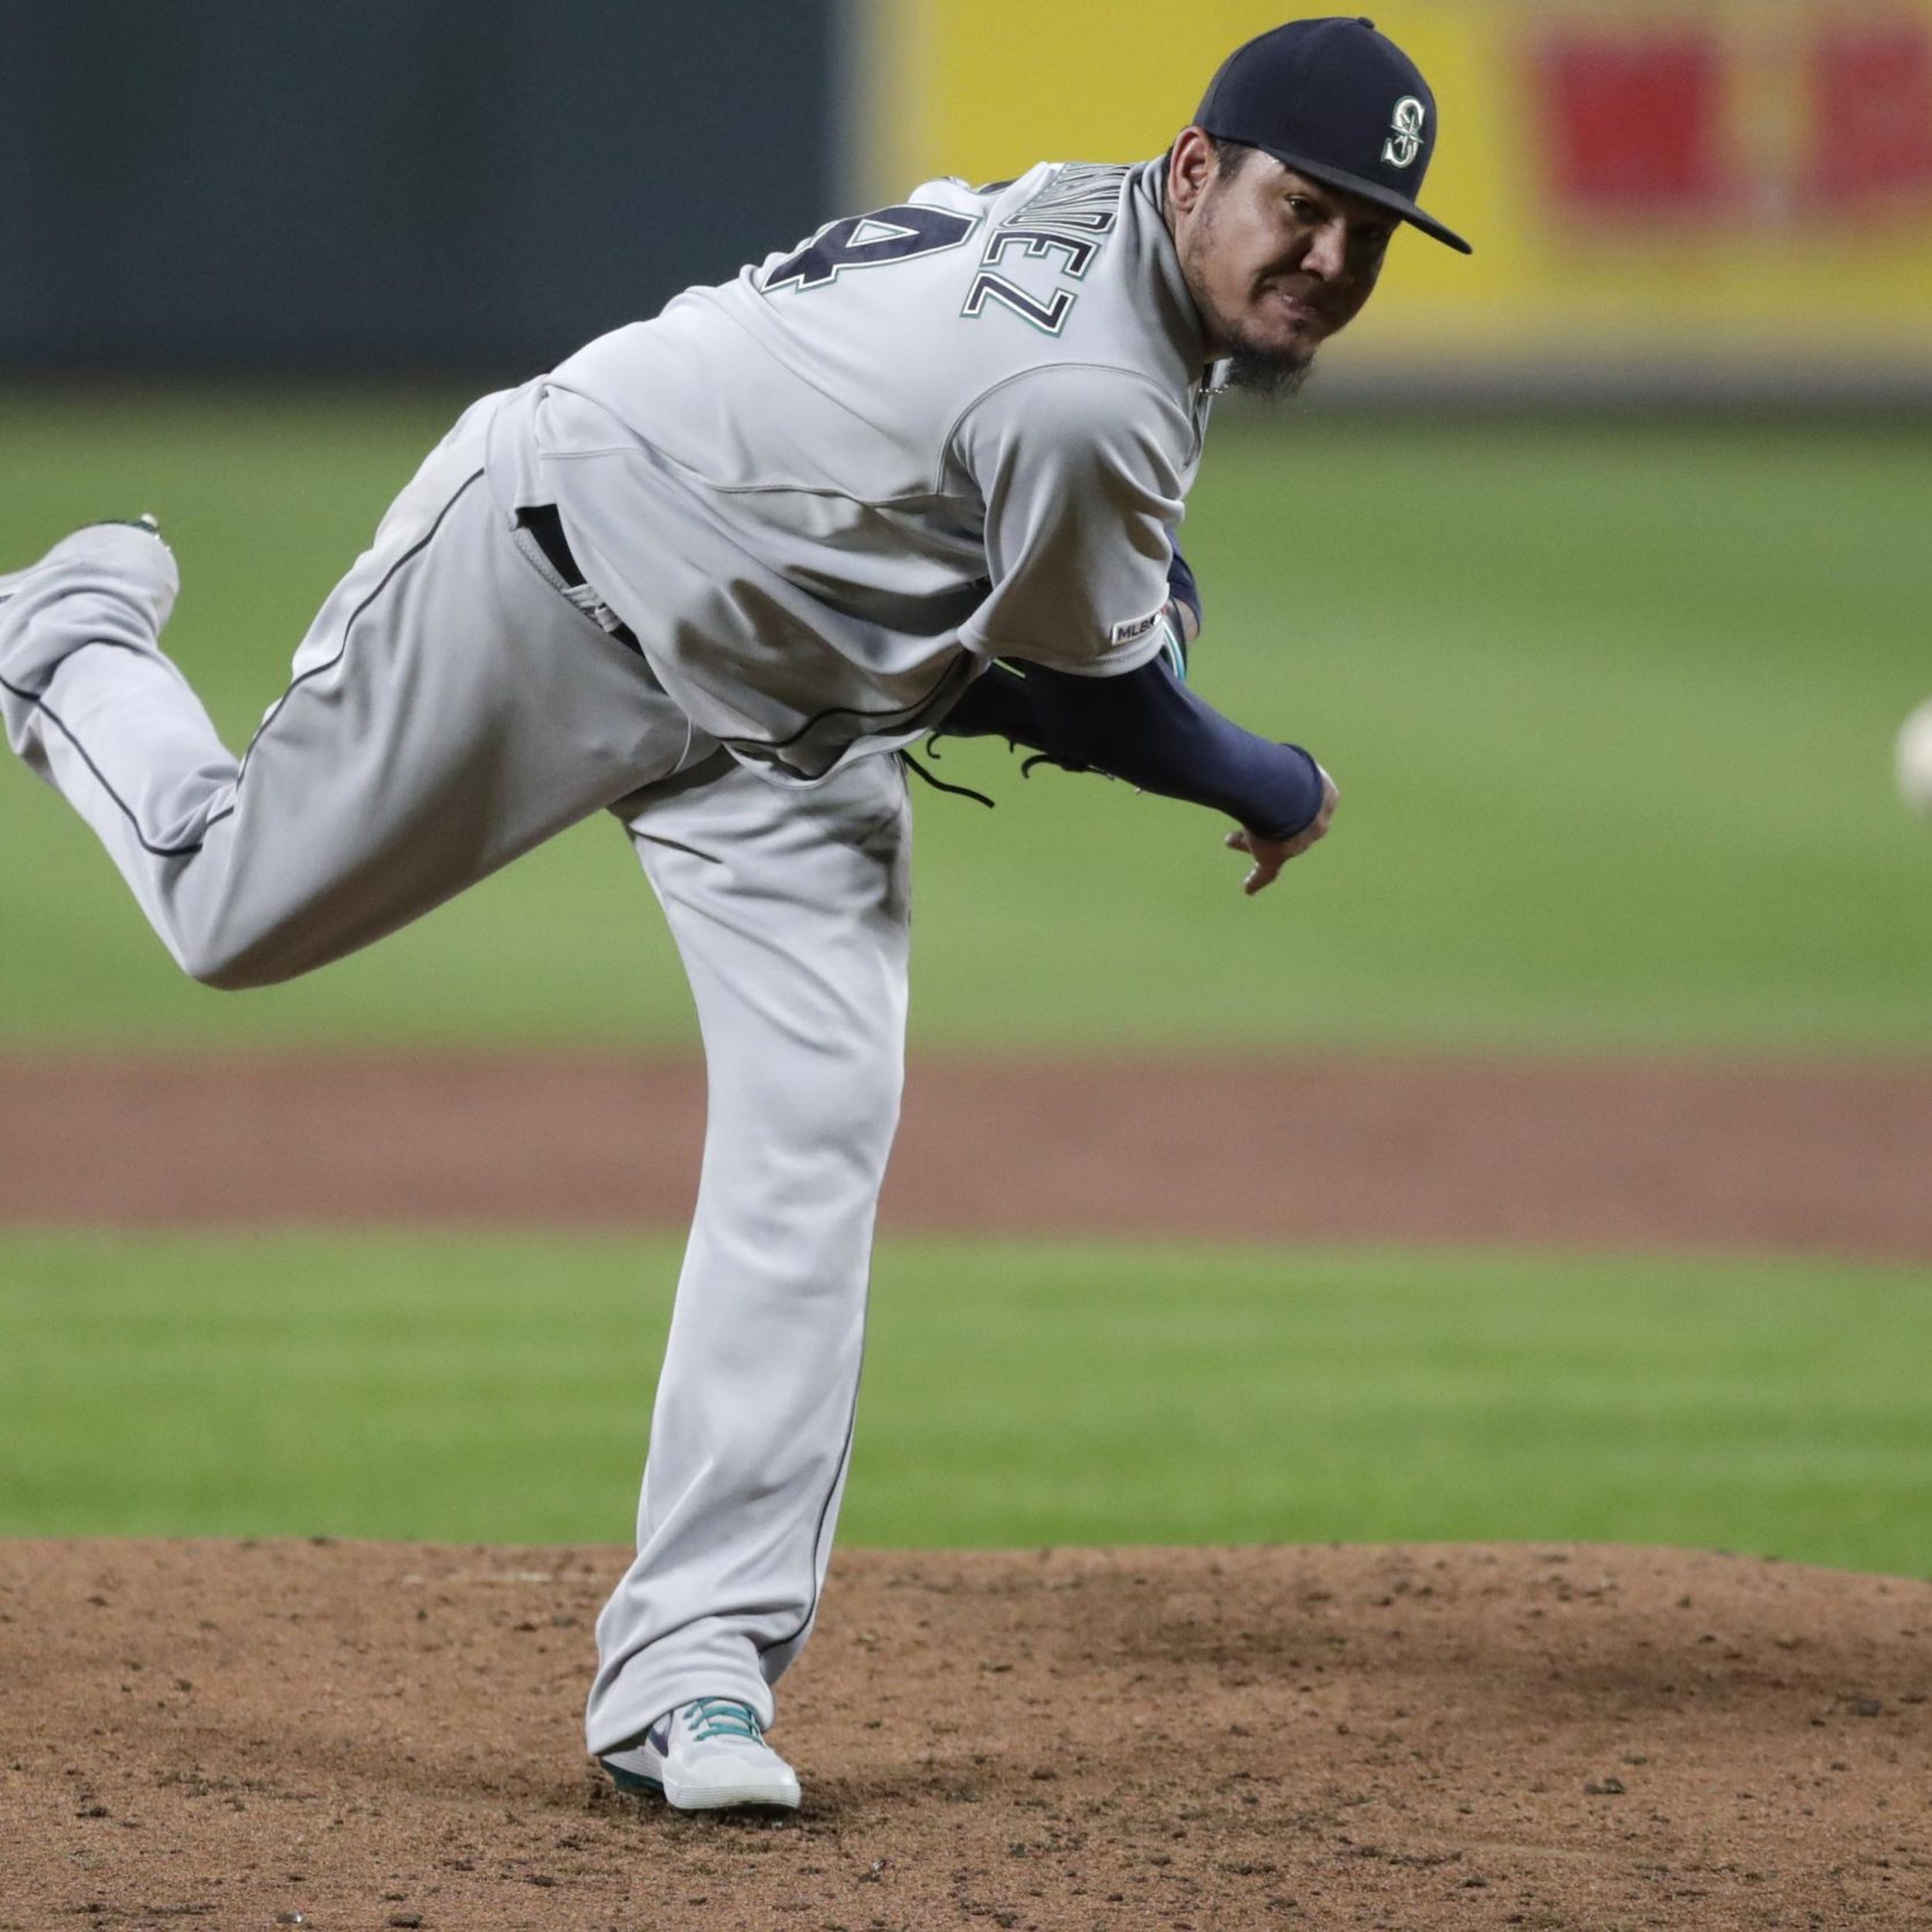 Farewell Felix: Hernandez likely makes his final start in Seattle